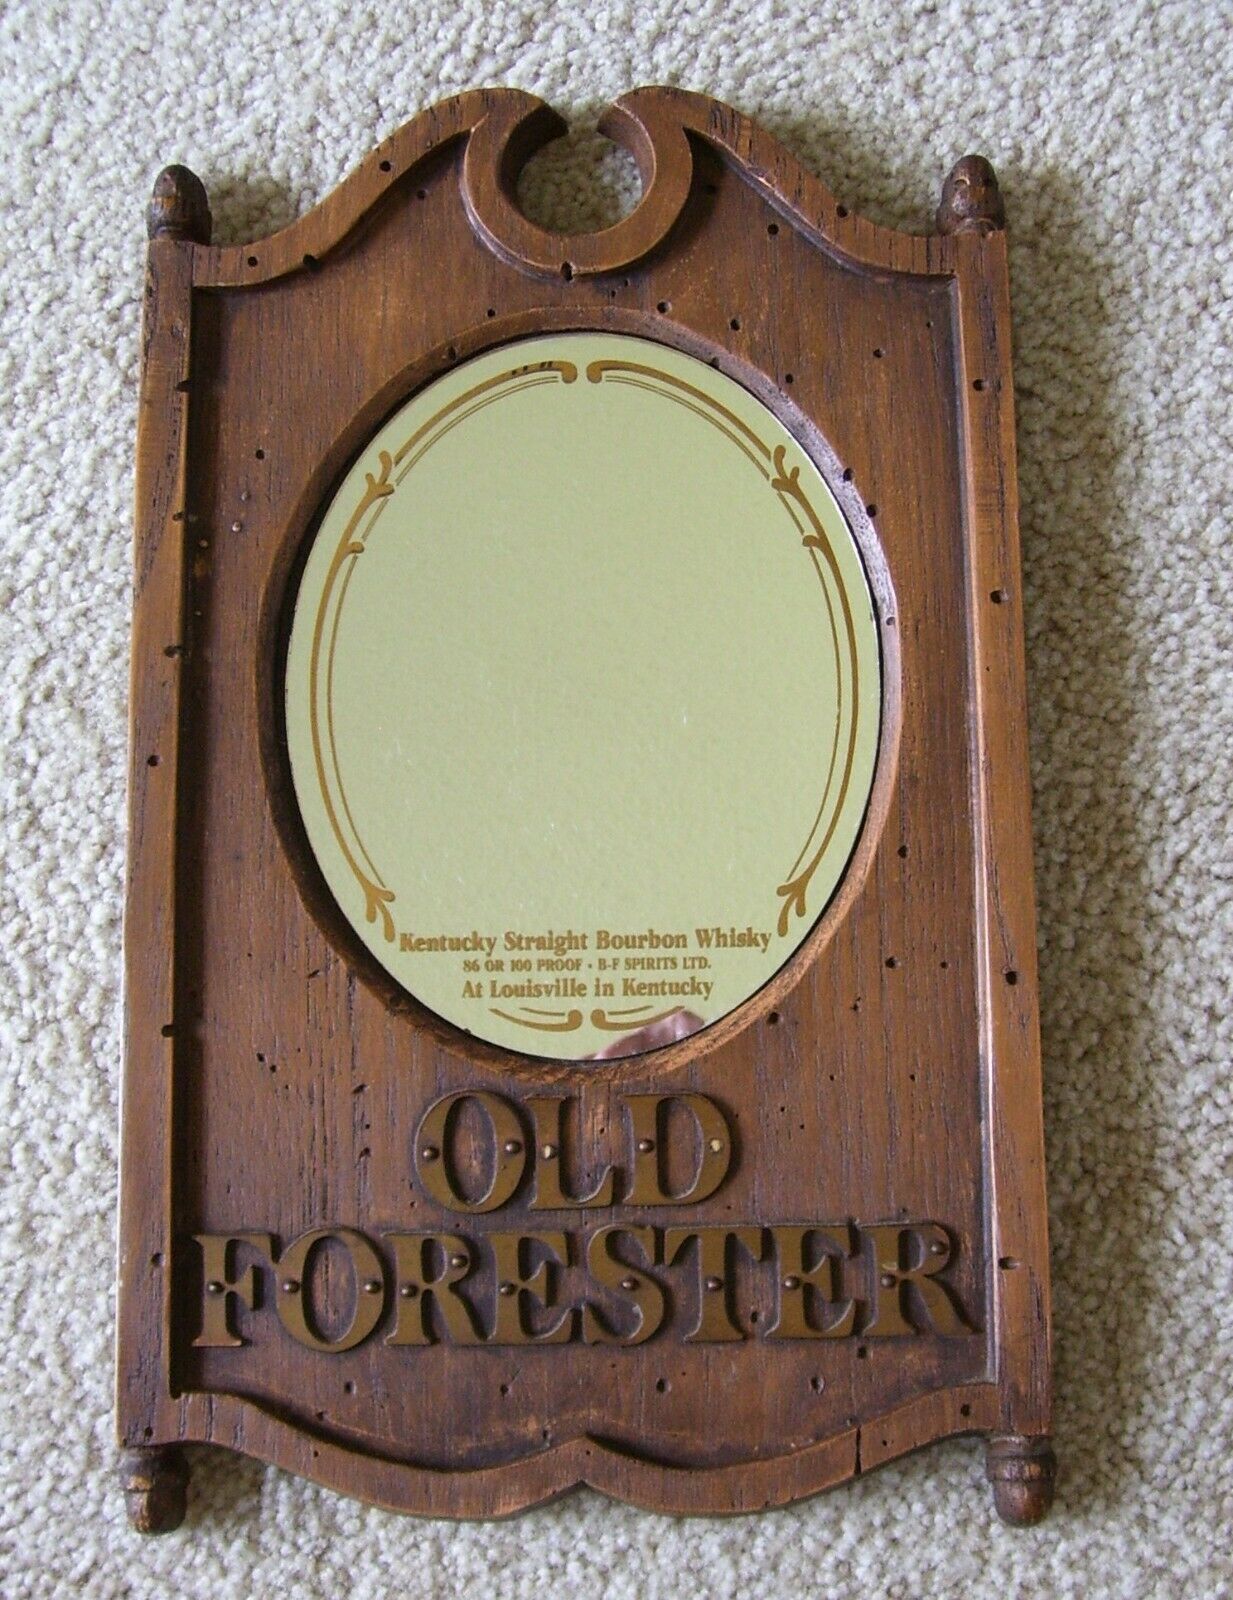 Old Forester Kentucky Straight Bourbon Whisky Mirror